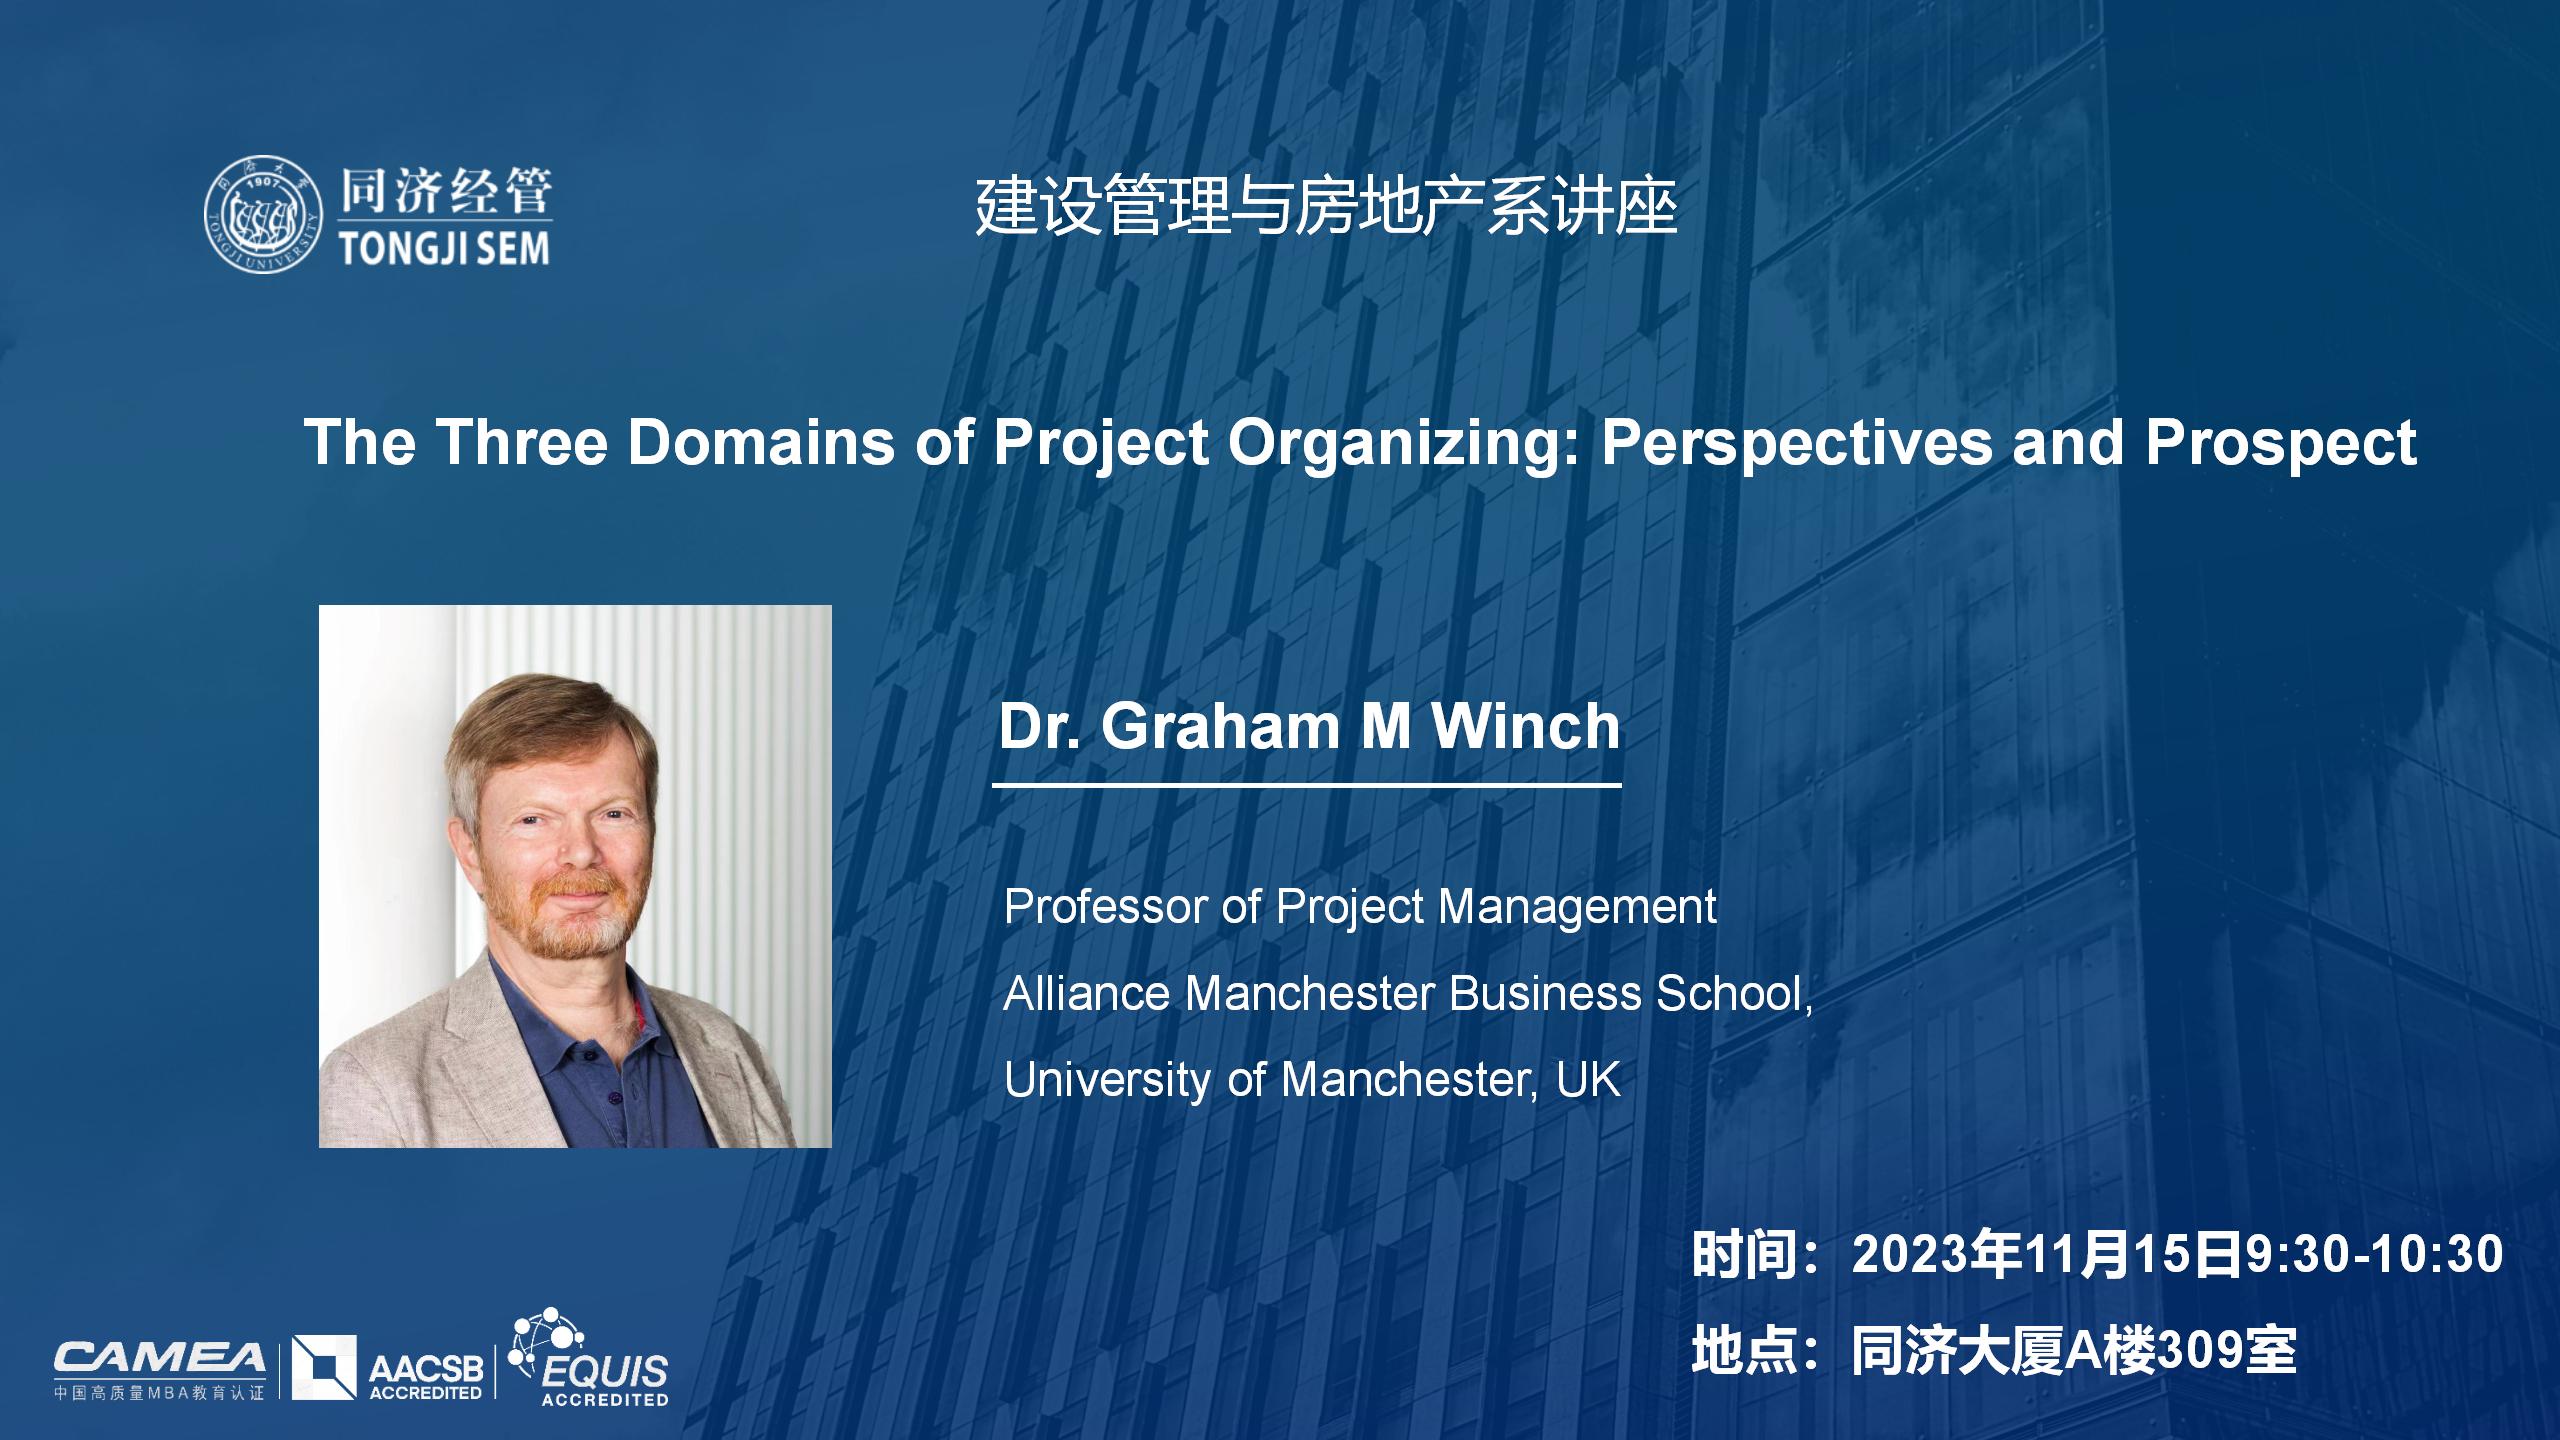 The Three Domains of Project Organizing: Perspectives and Prospect